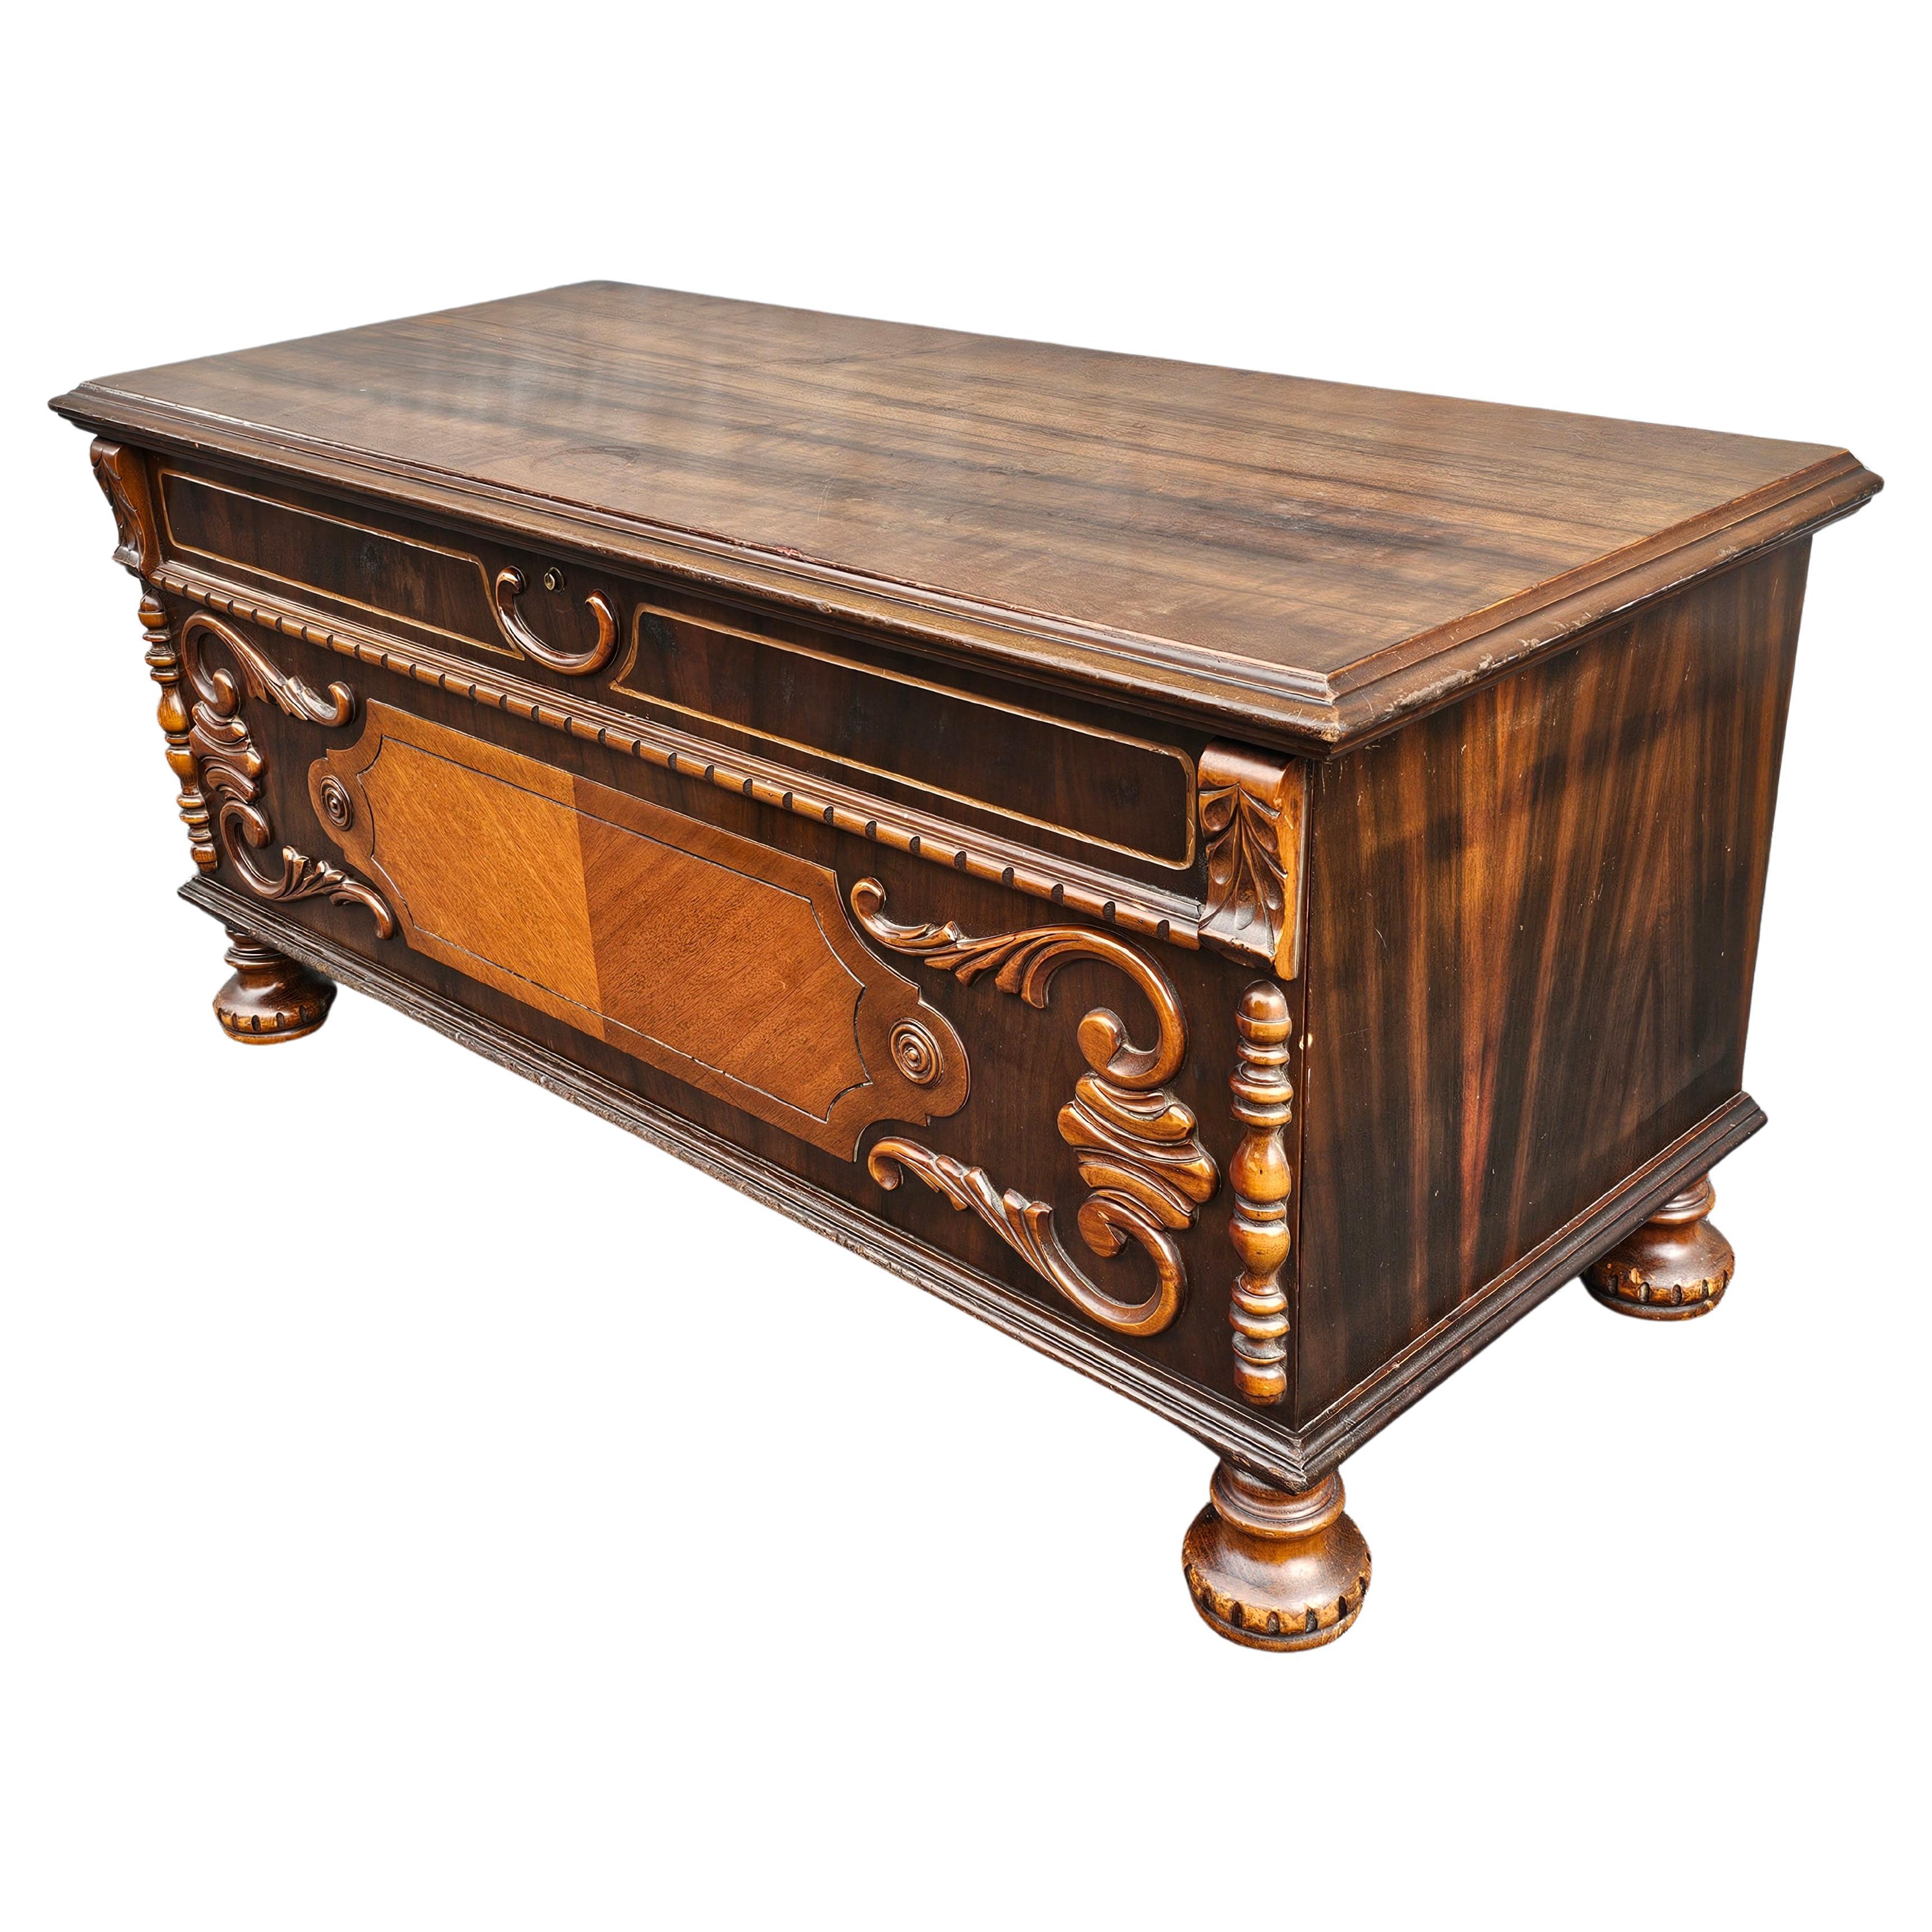 American Haverty Furniture William And Mary Style Carved Mahogany and Cedar Blanket Chest For Sale